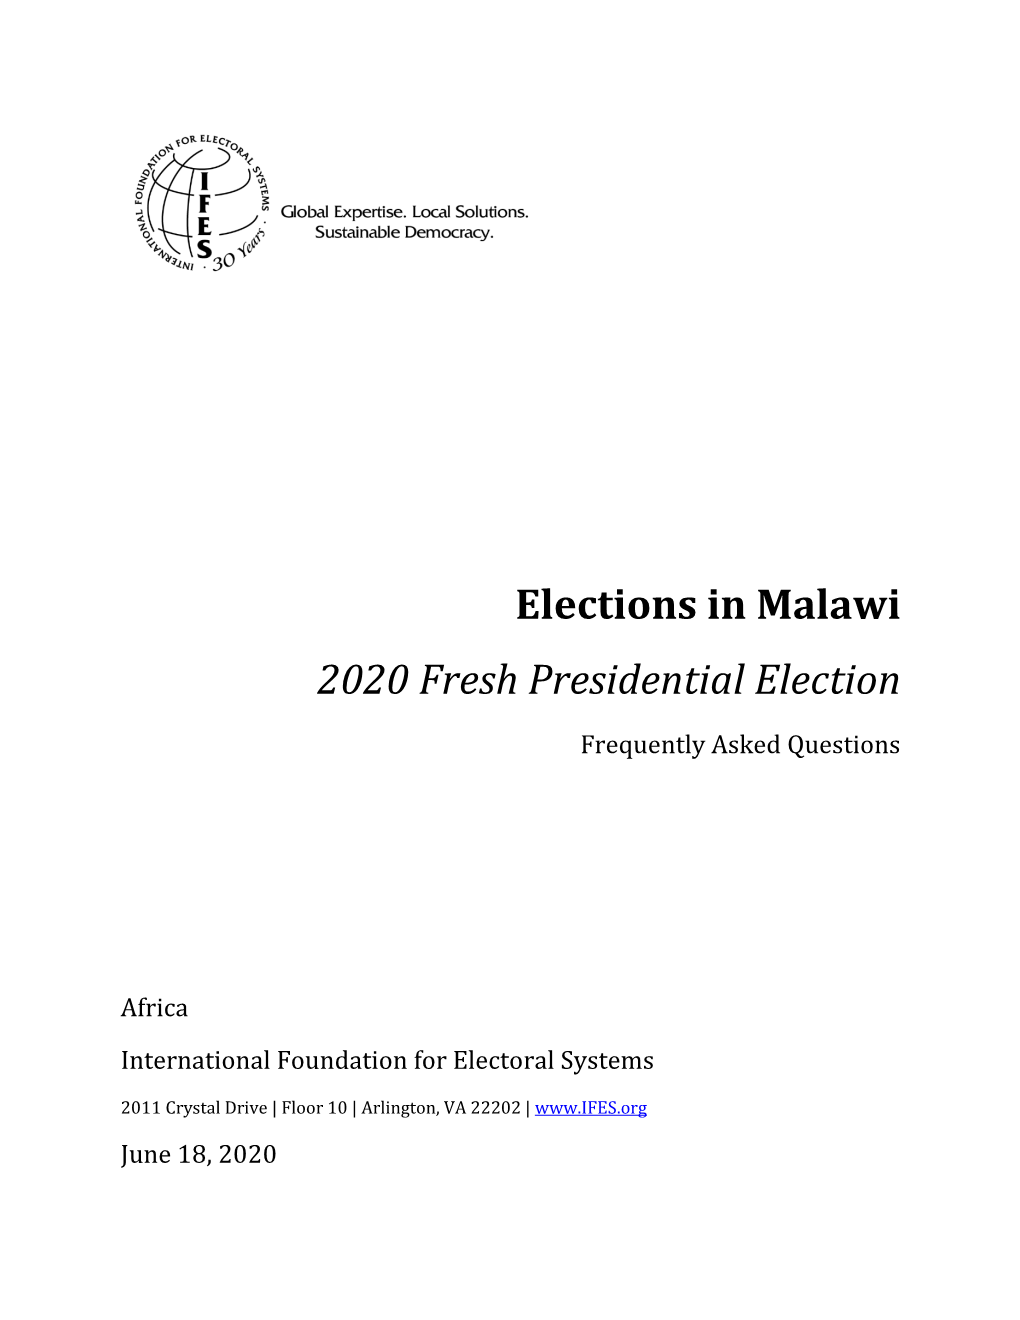 IFES Faqs Elections in Malawi 2020 Fresh Presidential Election June 2020